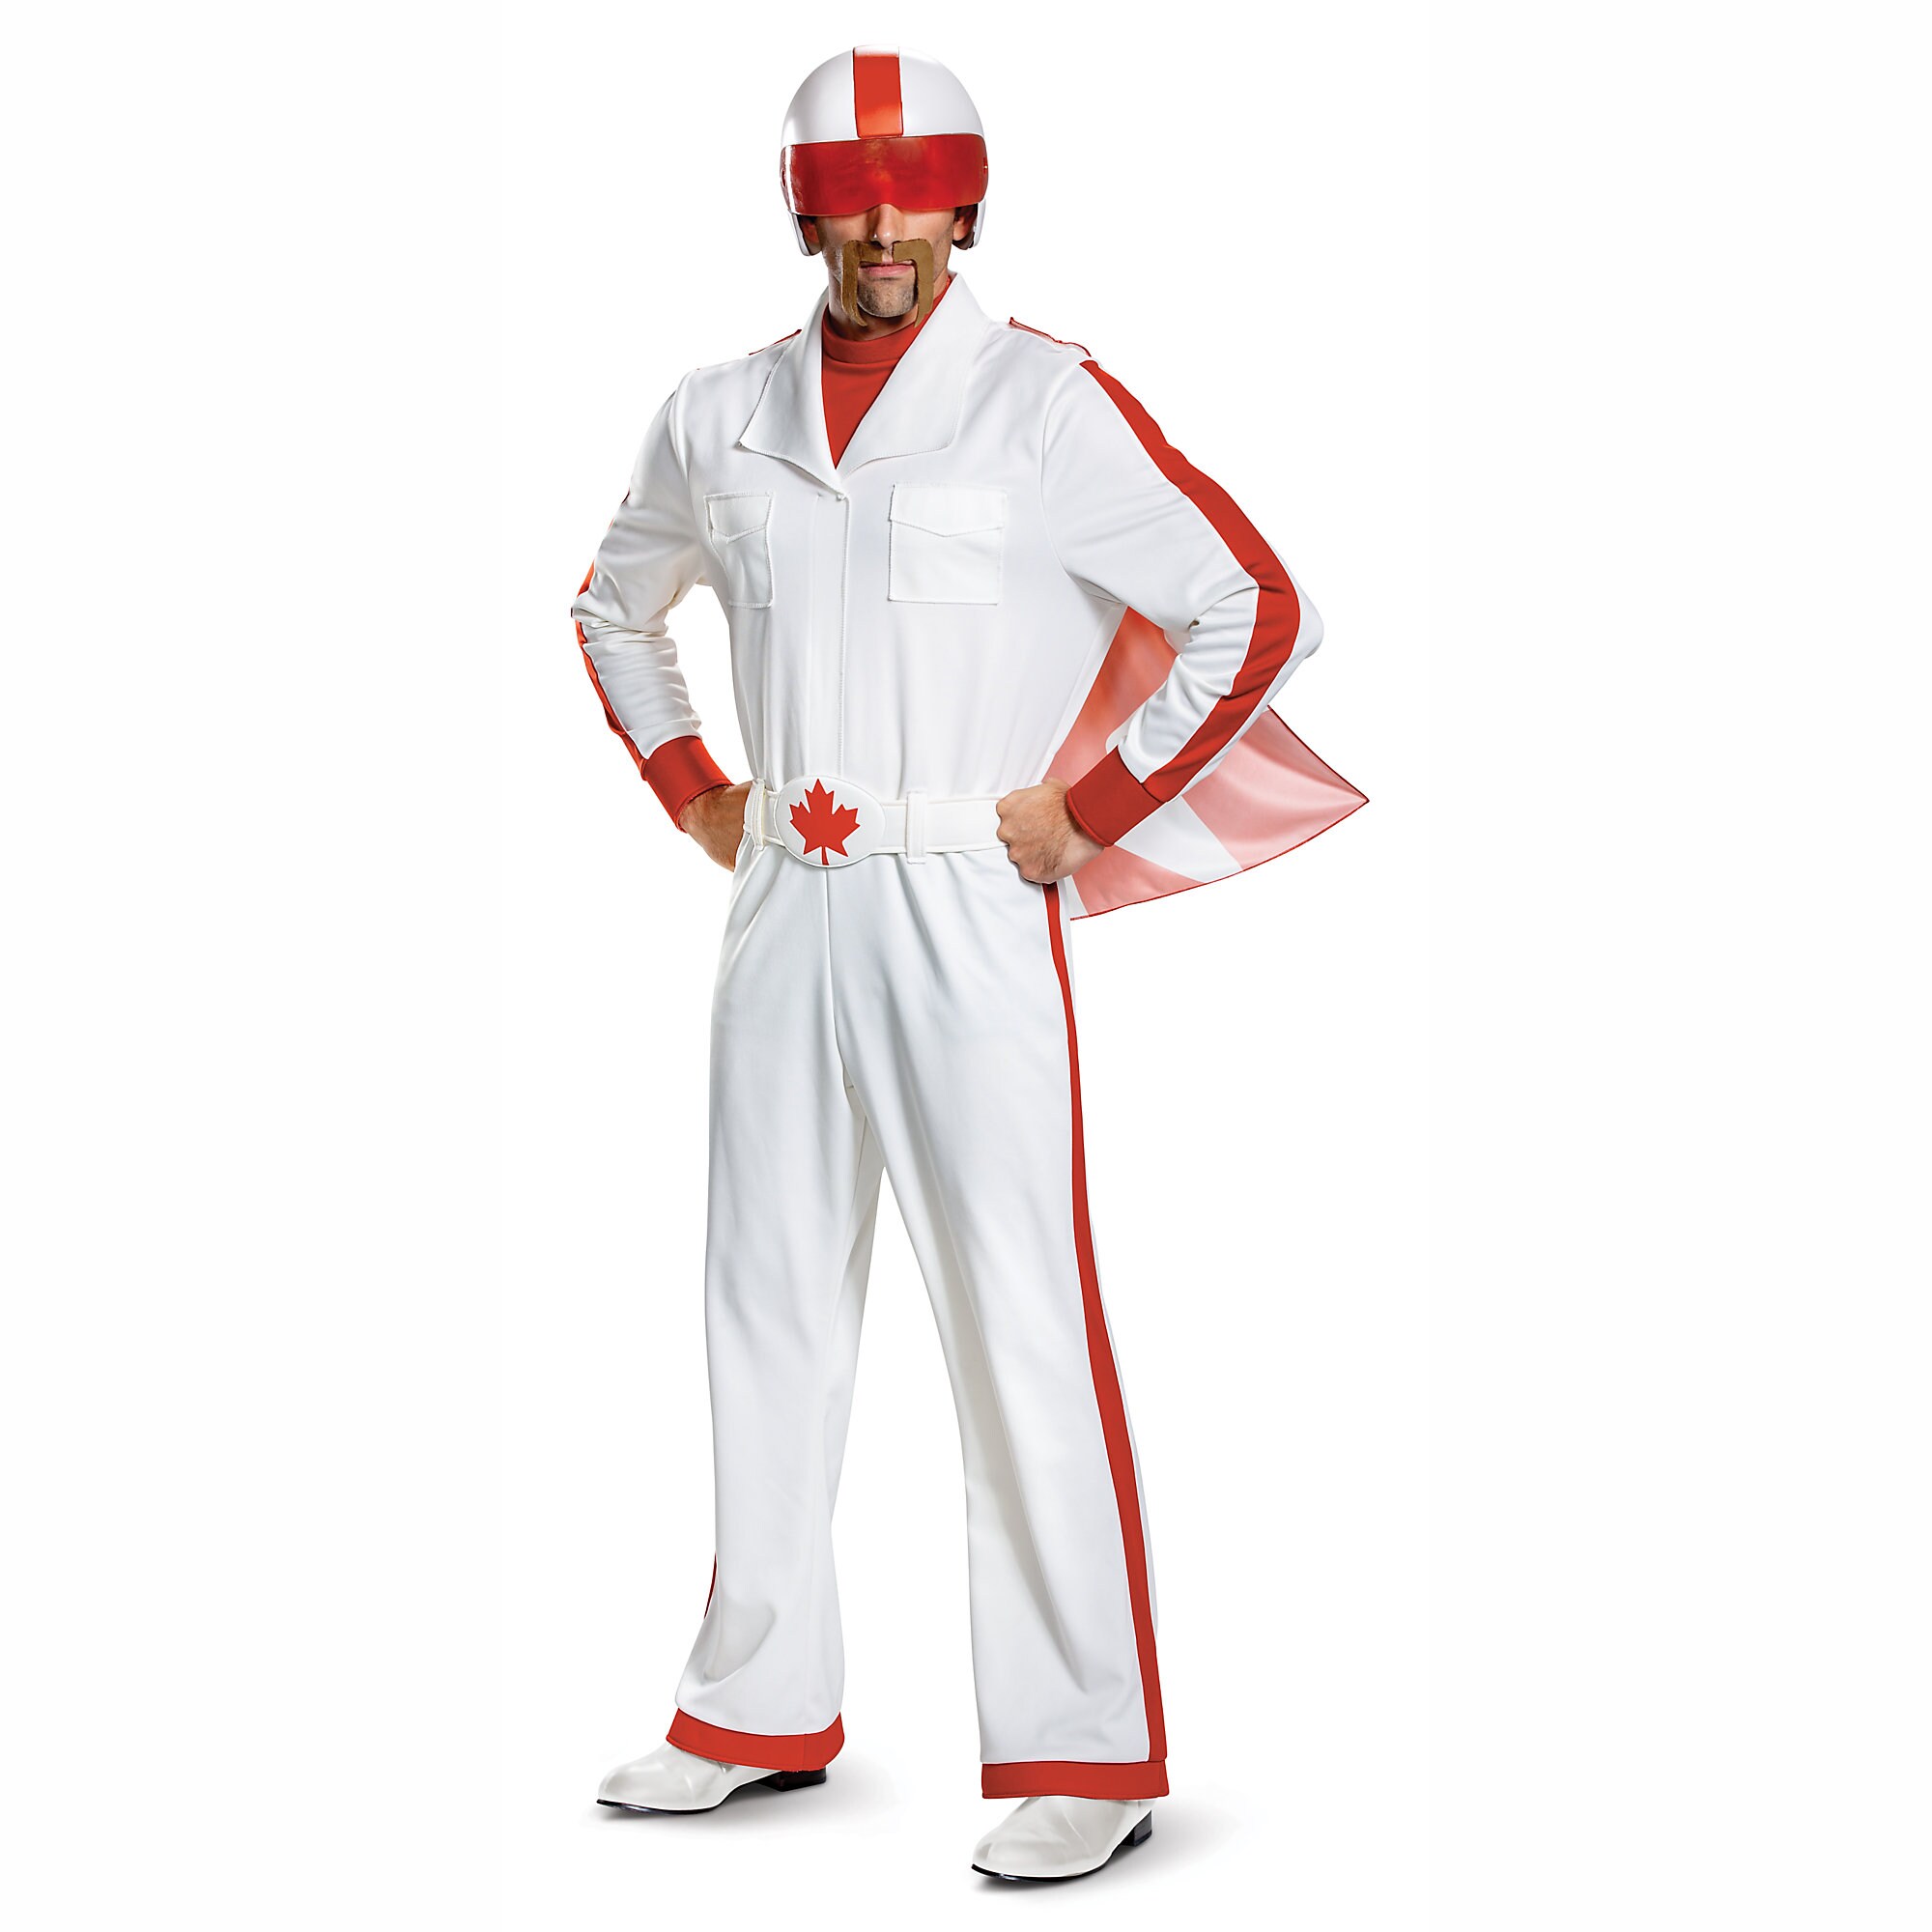 Duke Caboom Deluxe Costume for Adults by Disguise - Toy Story 4